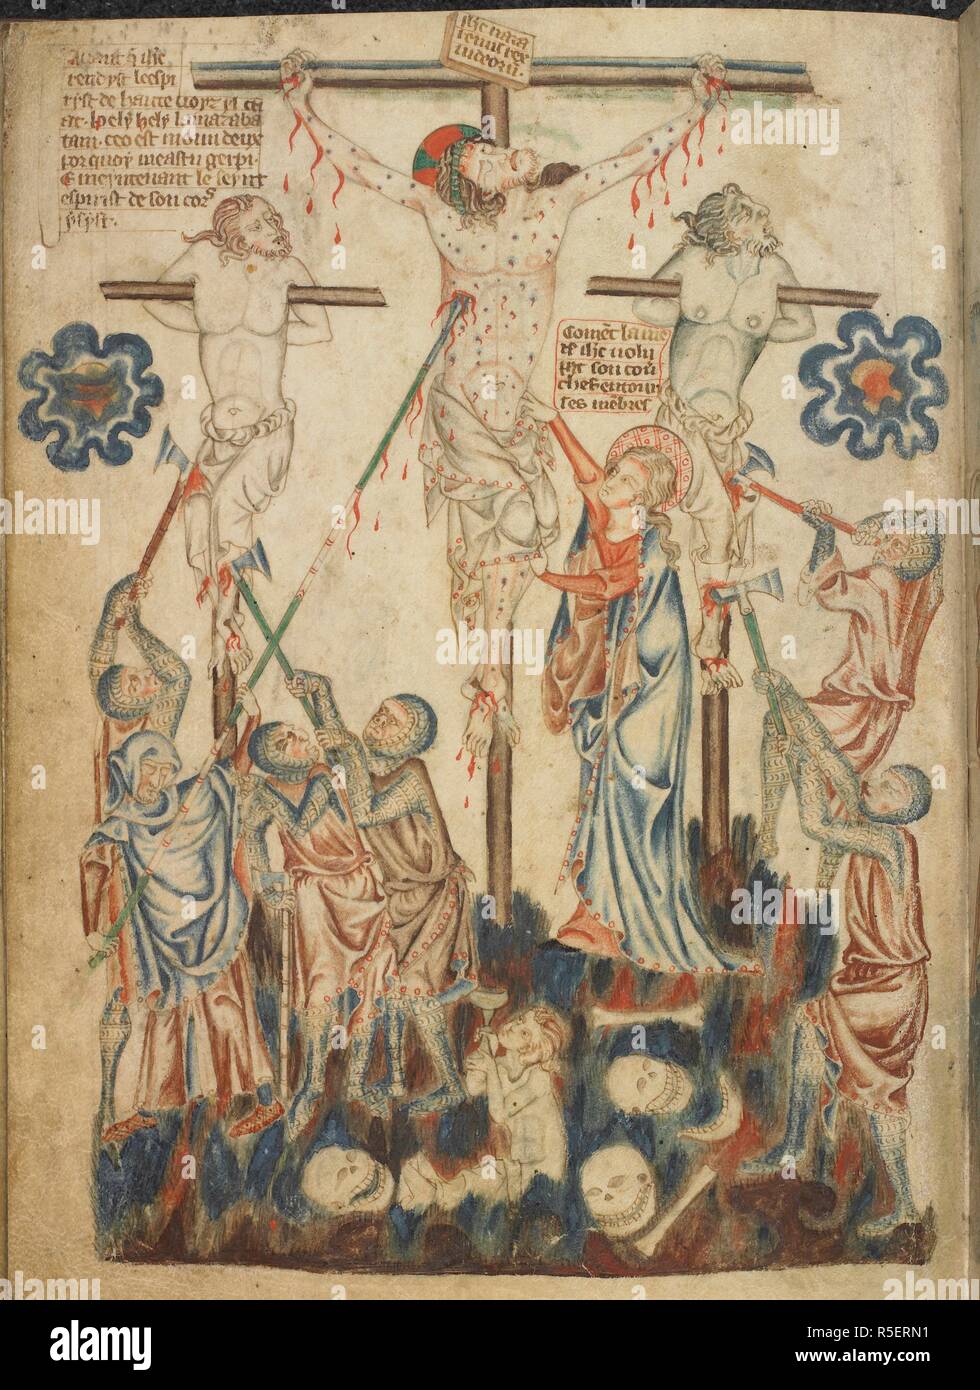 The Crucifixion: Christ's loins are covered by the Virgin Mary, his blood is collected in a chalice by a woman rising from her grave, and the two thieves on either side of Christ have their legs broken by soldiers. Holkham Bible Picture Book. England, circa 1320-1330. Source: Add. 47682, f.32v. Stock Photo